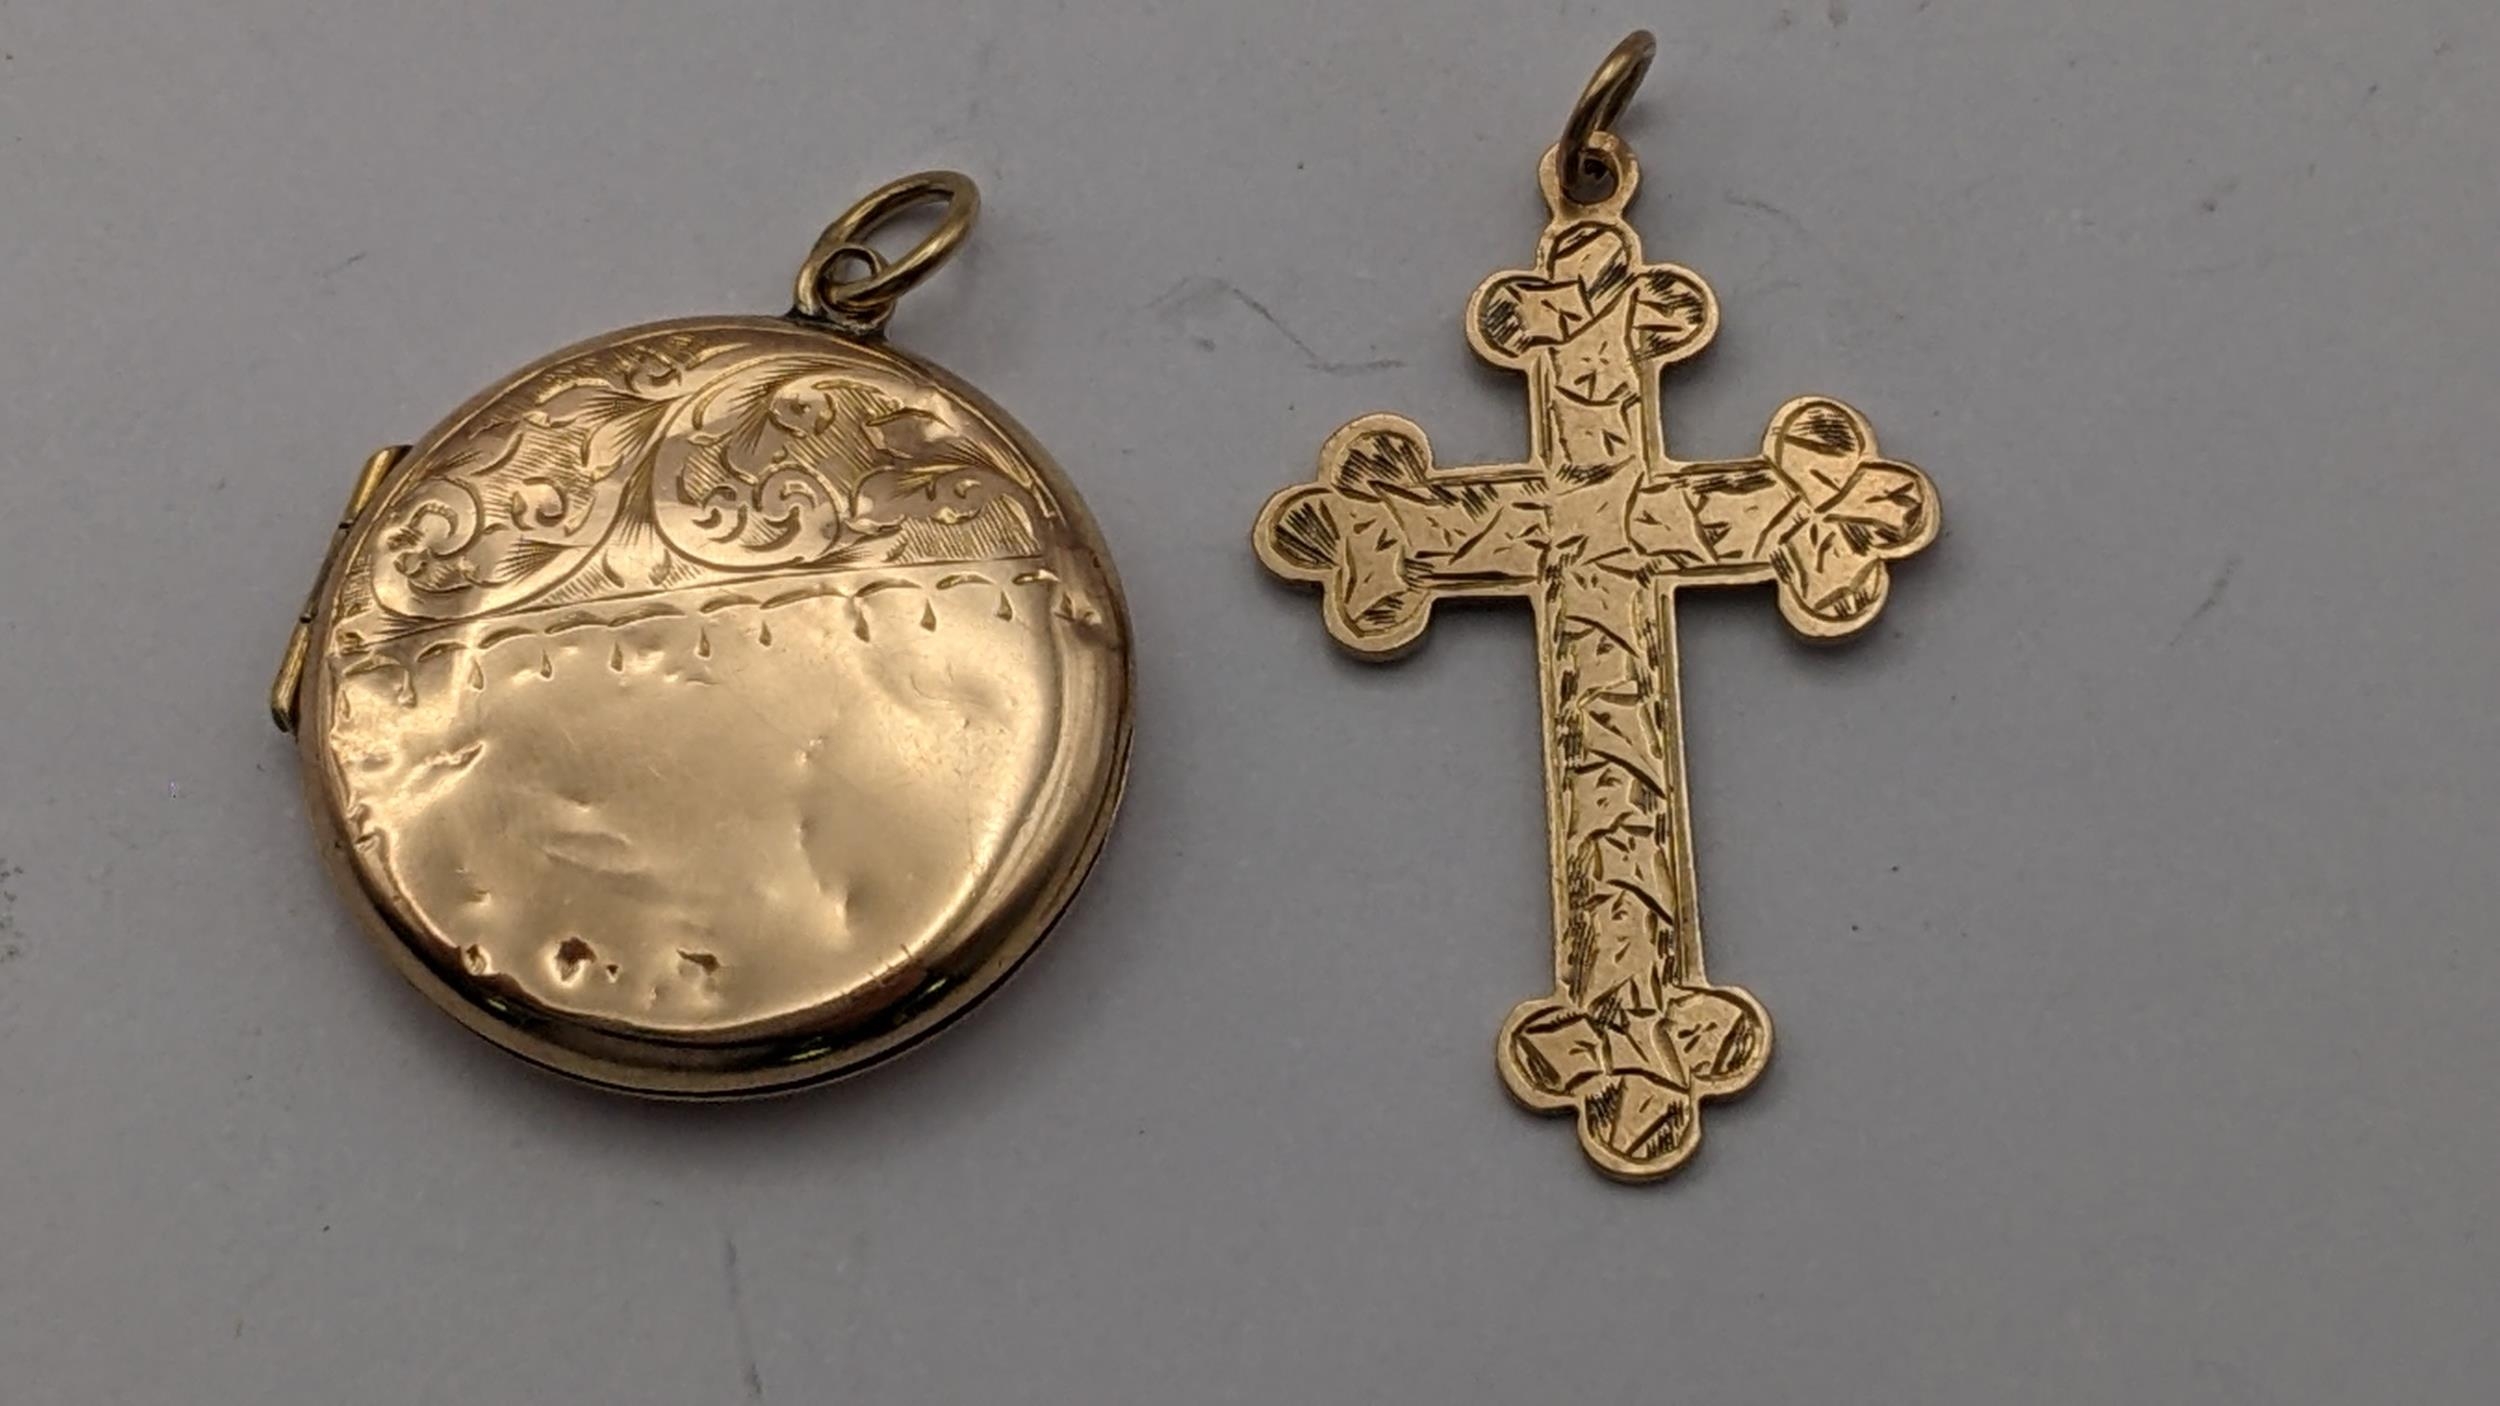 A 9ct gold cross pendant, 2.2g, together with a 9ct front and back pendant Location: